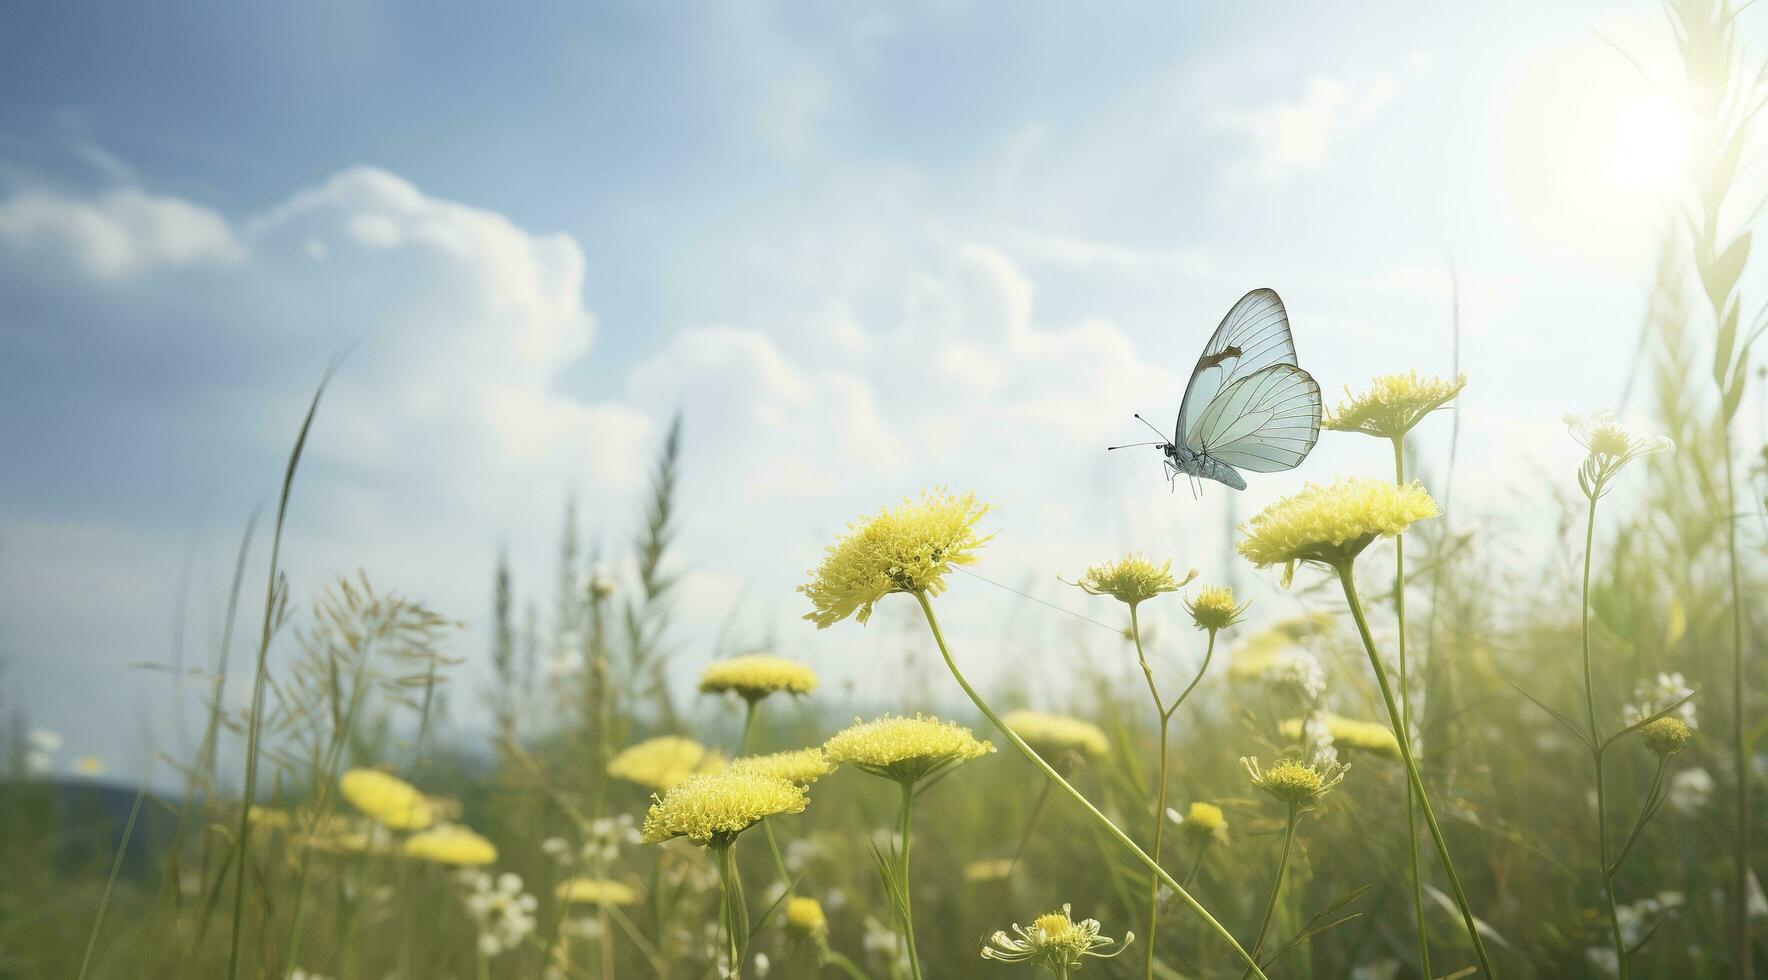 abstract nature spring Background. spring flower and butterfly, generate ai photo